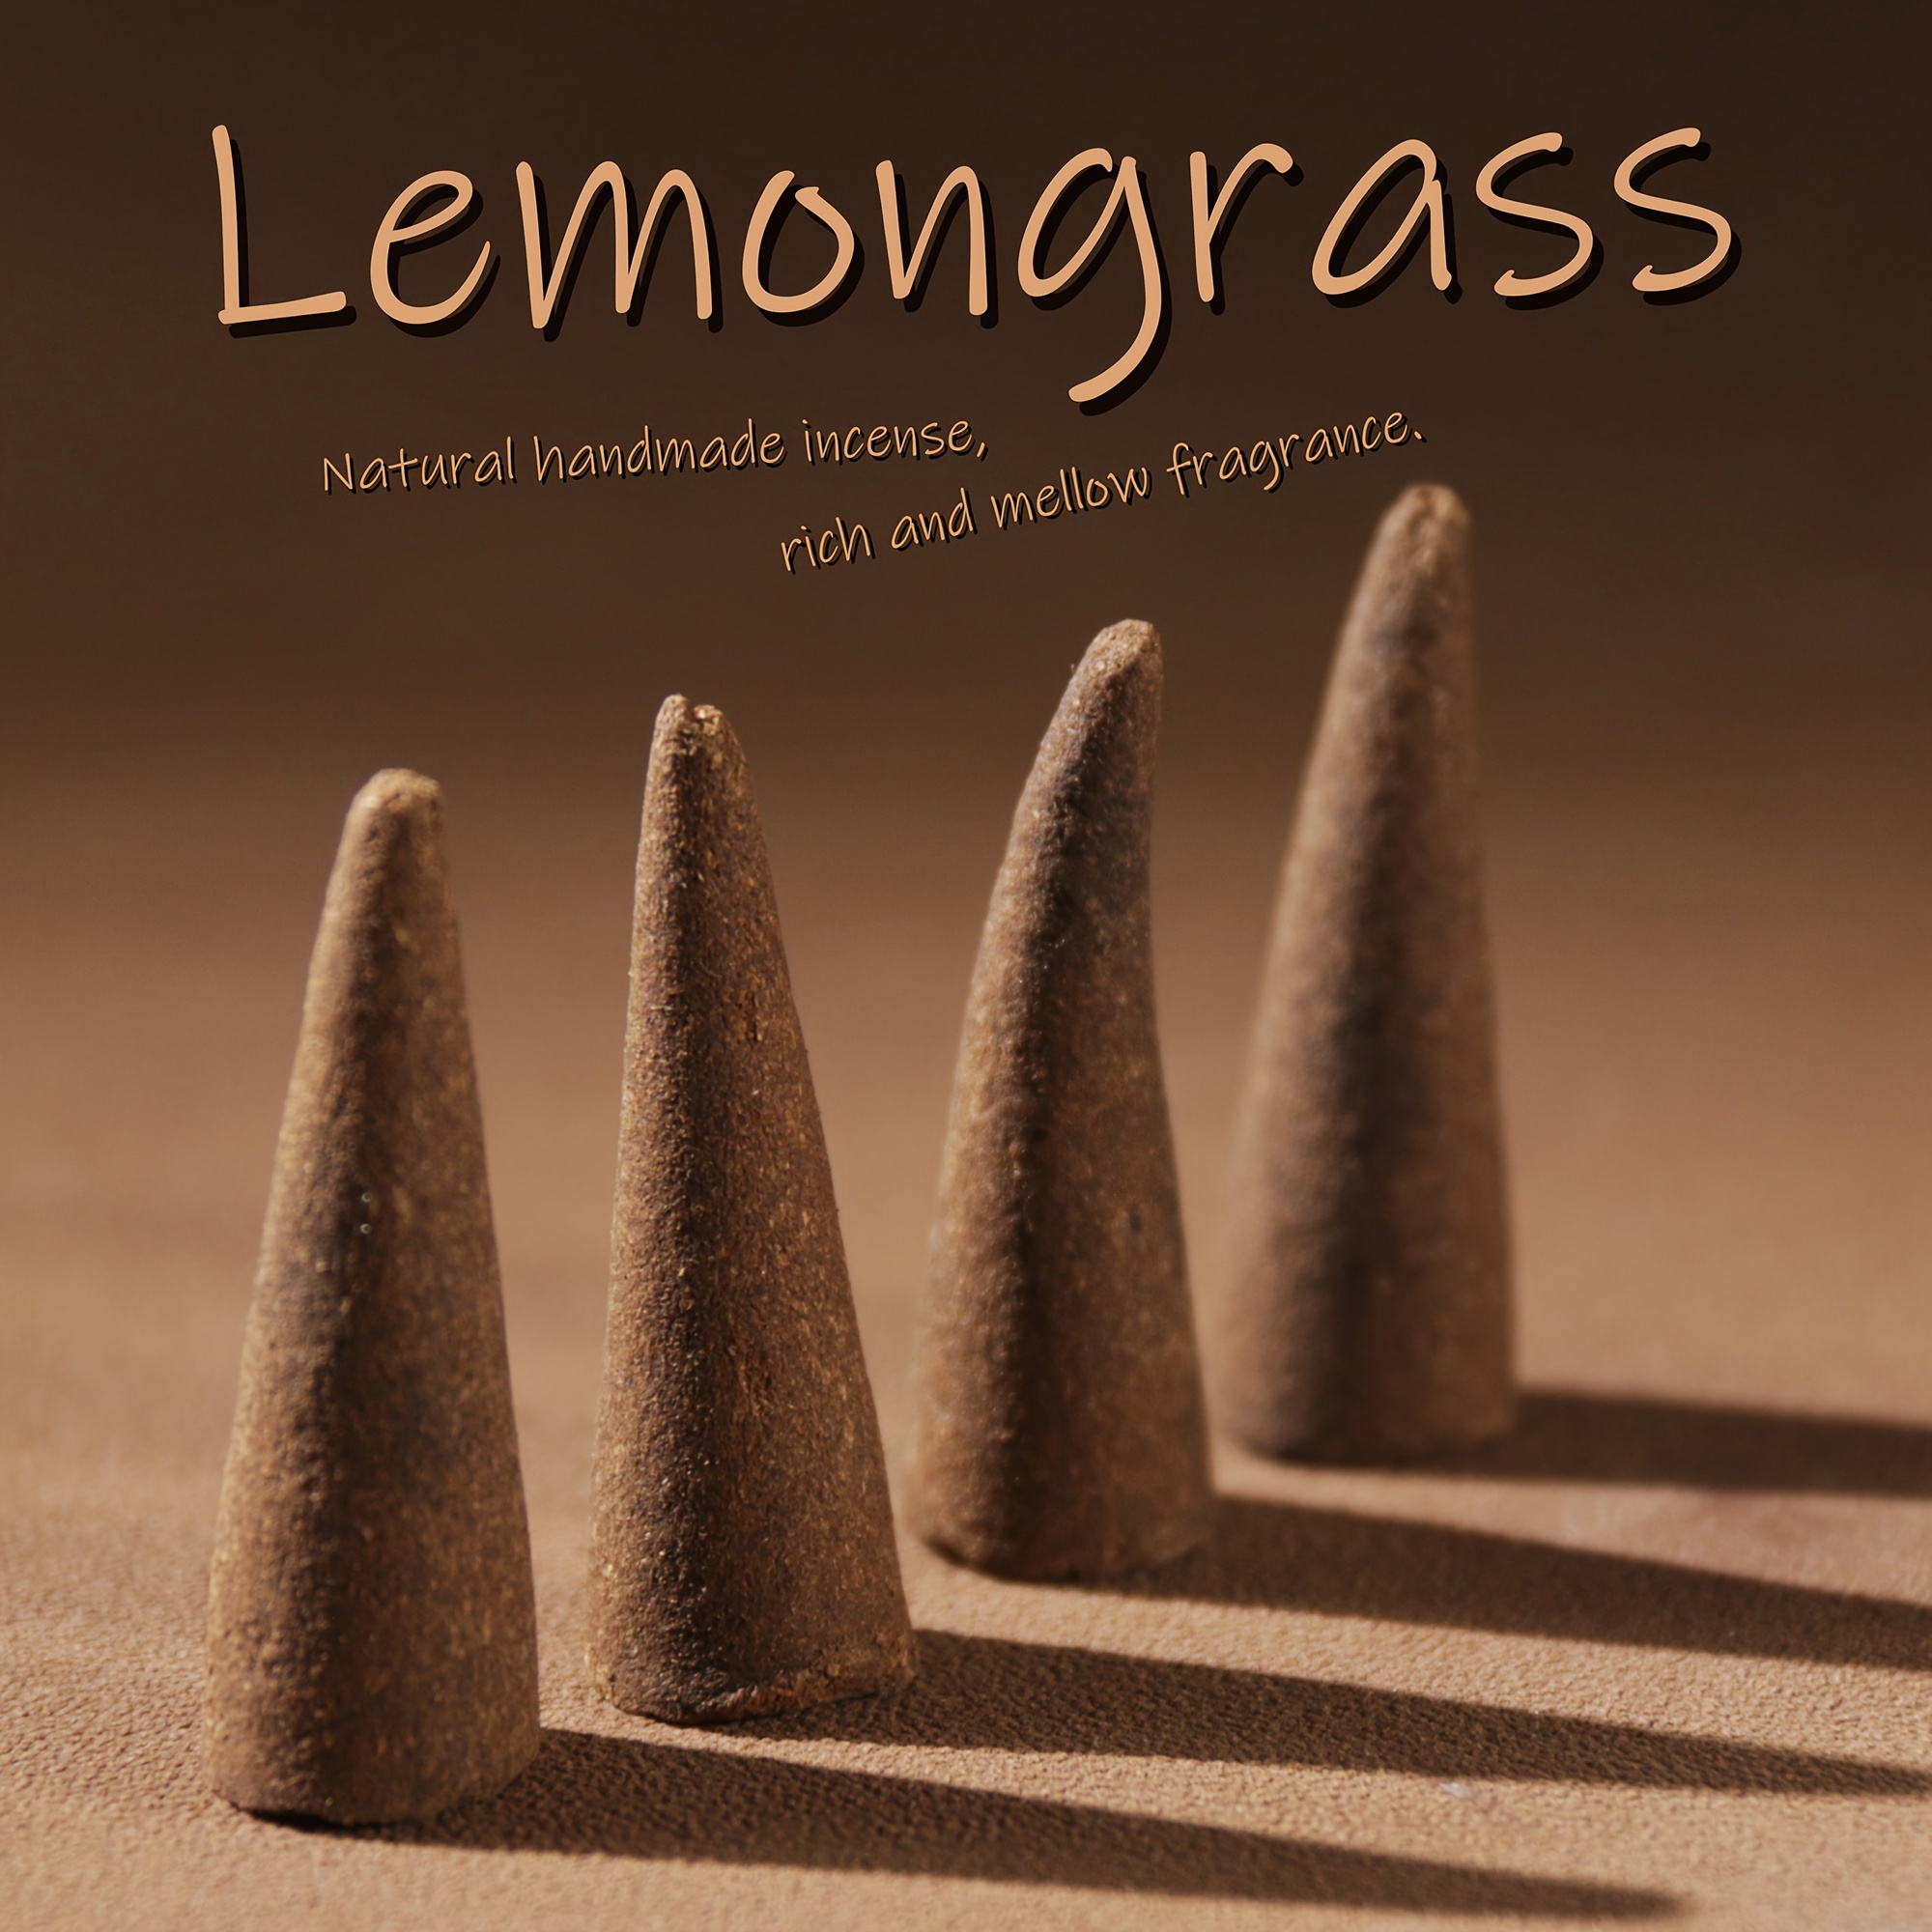 

8/15 Piece Handcrafted Lemongrass Incense Sticks - Perfect For Cleansing Negative Energy, Aromatherapy, Meditation, Yoga & Home Decor